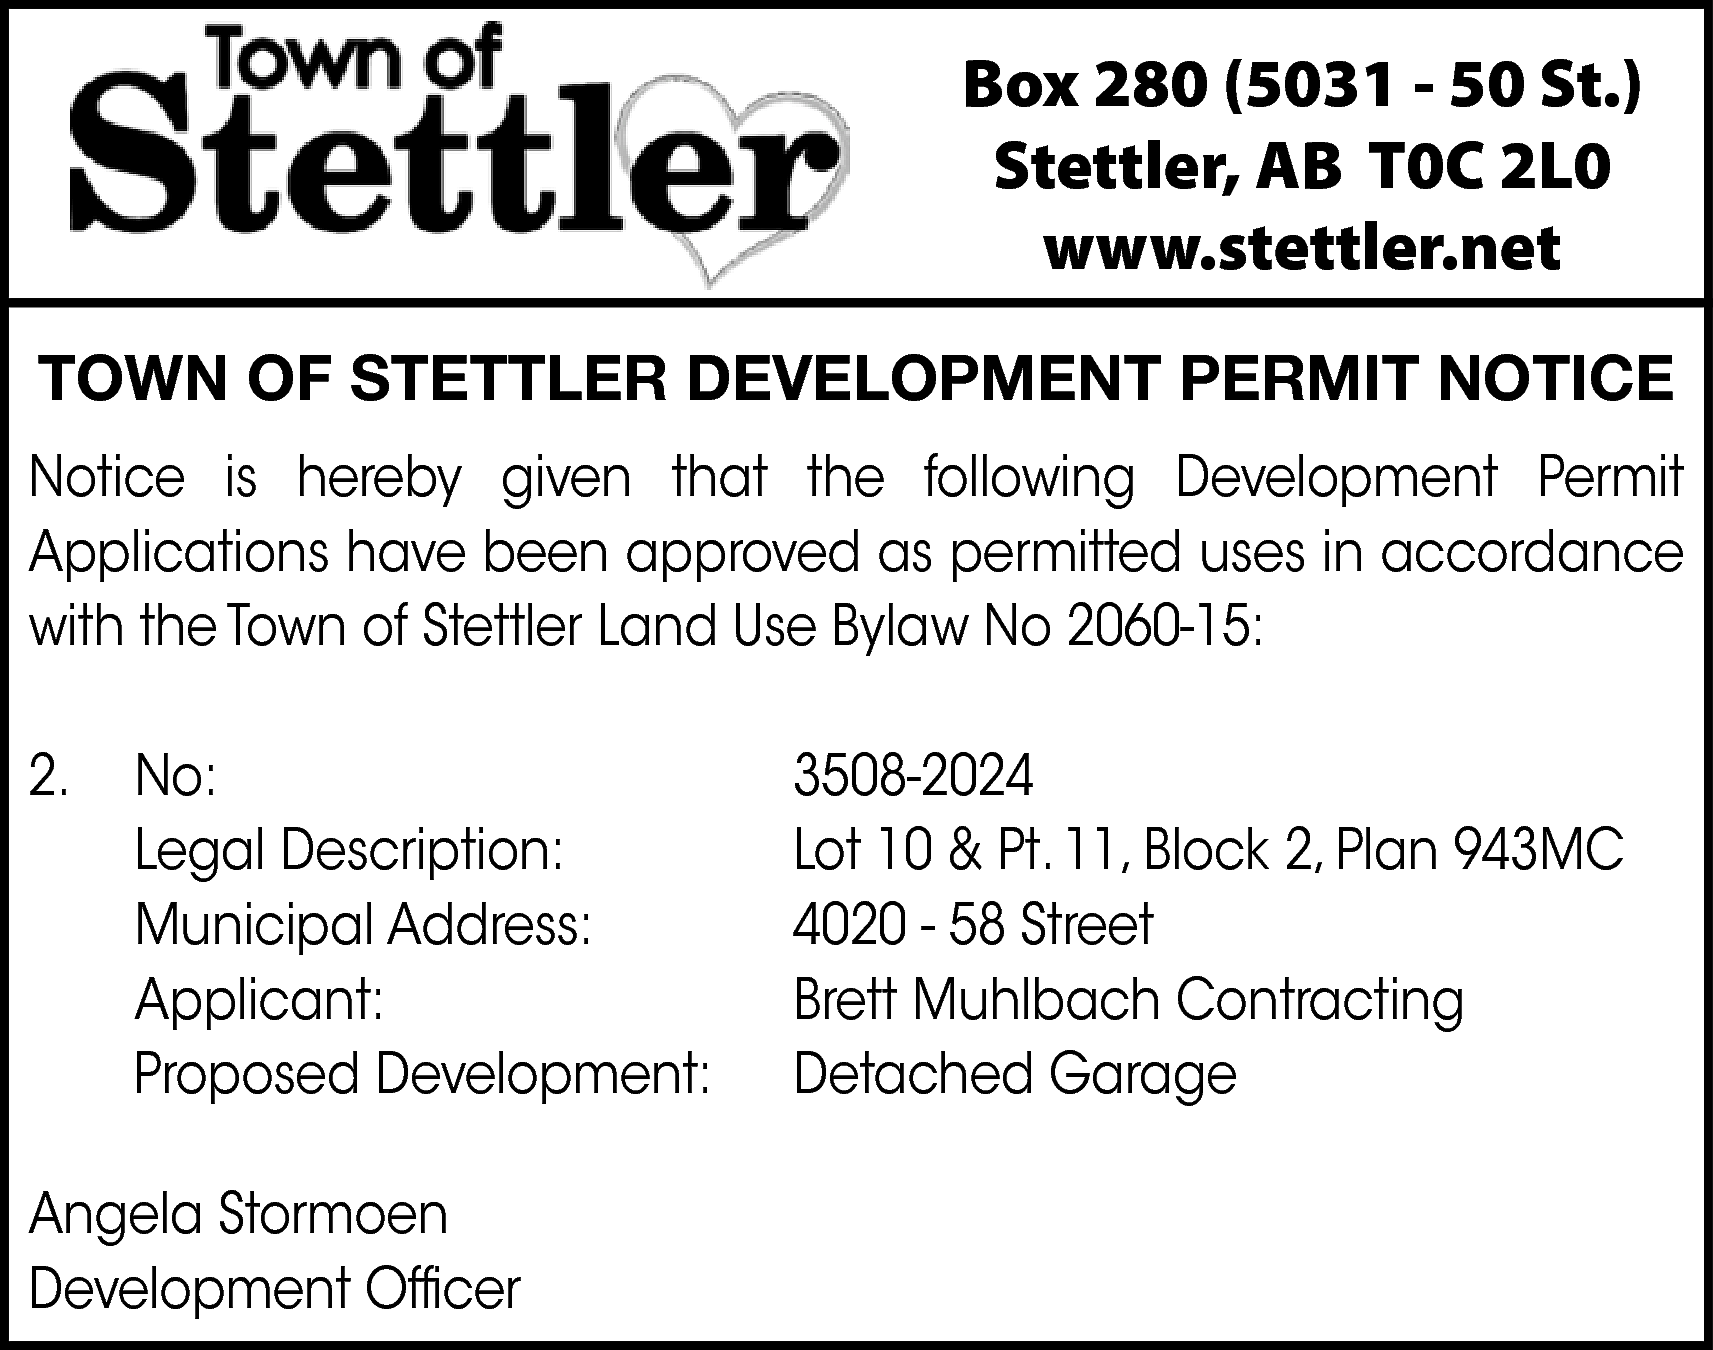 Box 280 (5031 - 50  Box 280 (5031 - 50 St.)  Stettler, AB T0C 2L0  www.stettler.net  TOWN OF STETTLER DEVELOPMENT PERMIT NOTICE  Notice is hereby given that the following Development Permit  Applications have been approved as permitted uses in accordance  with the Town of Stettler Land Use Bylaw No 2060-15:  2.    No:  Legal Description:  Municipal Address:  Applicant:  Proposed Development:    Angela Stormoen  Development Officer    3508-2024  Lot 10 & Pt. 11, Block 2, Plan 943MC  4020 - 58 Street  Brett Muhlbach Contracting  Detached Garage    